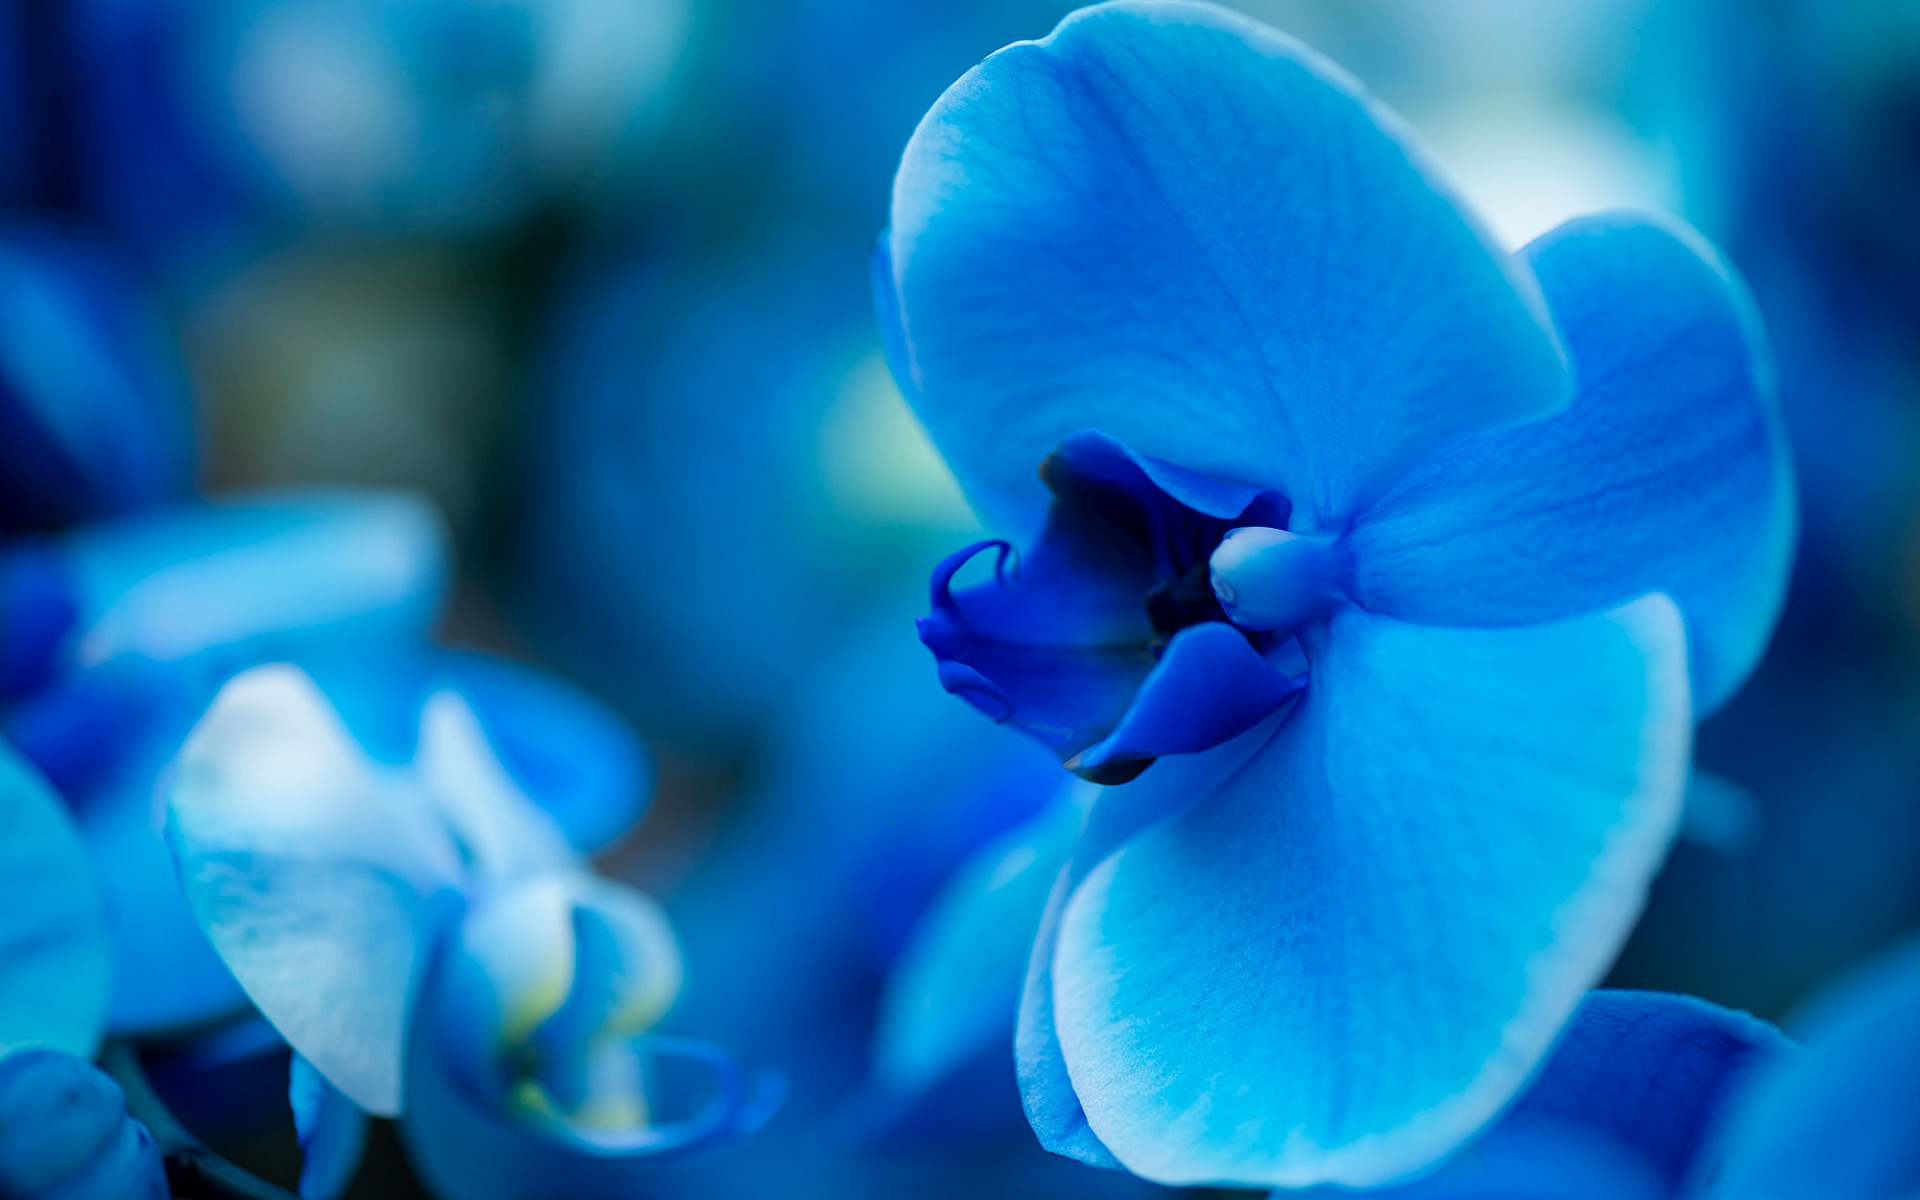 Download wallpaper blue orchid, background with orchids, beautiful flowers, orchids, blue flower, blue floral background for desktop with resolution 1920x1200. High Quality HD picture wallpaper